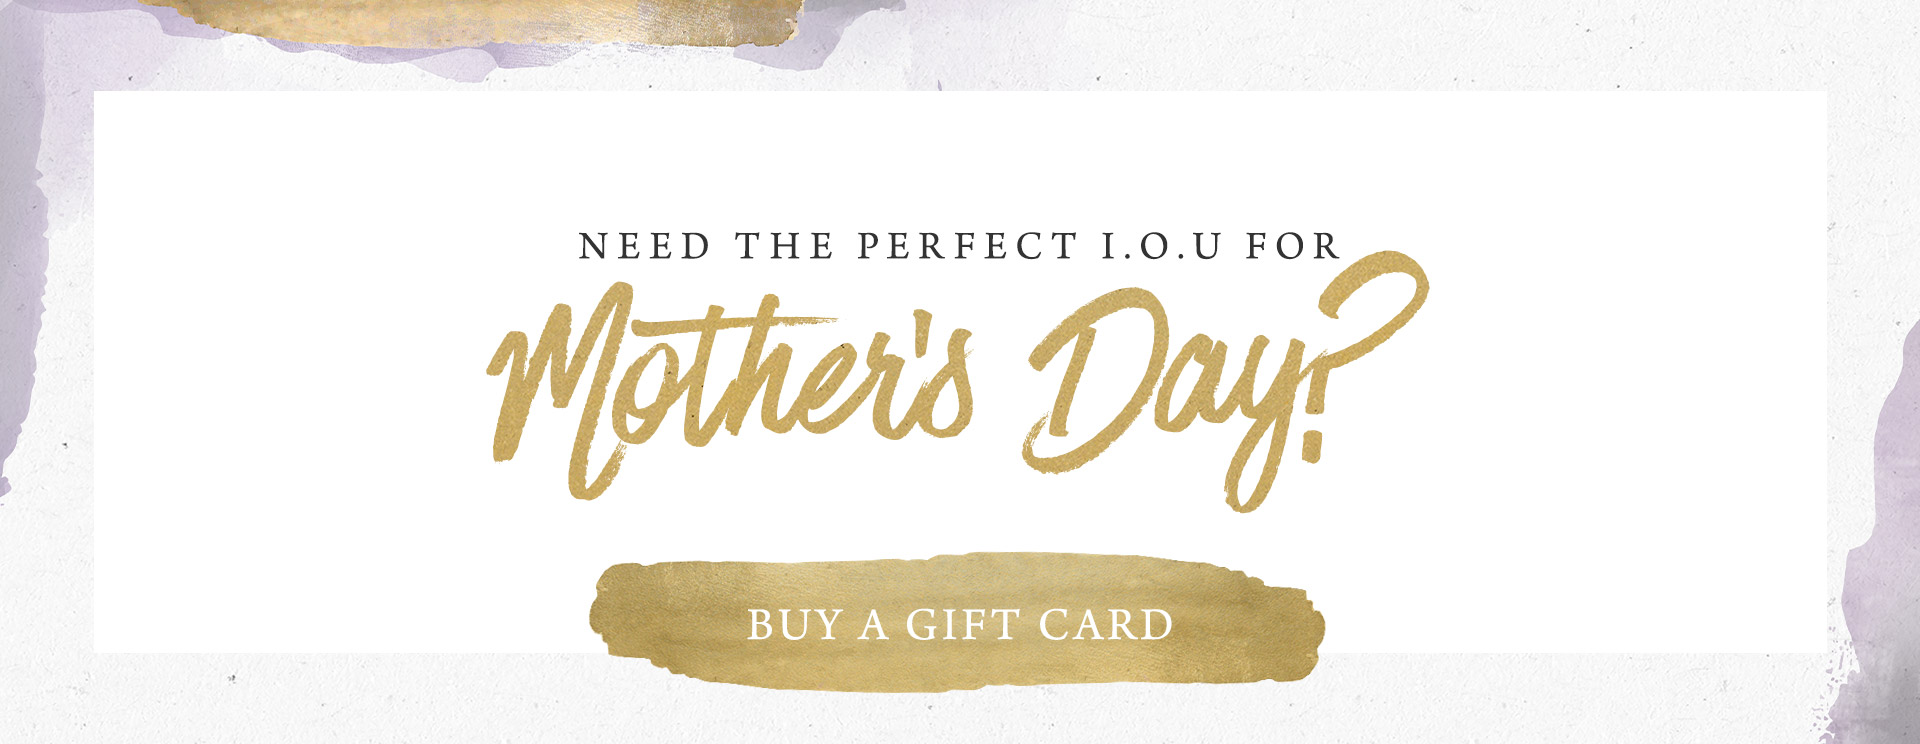 Mother's Day 2019 at The Fox & Hounds